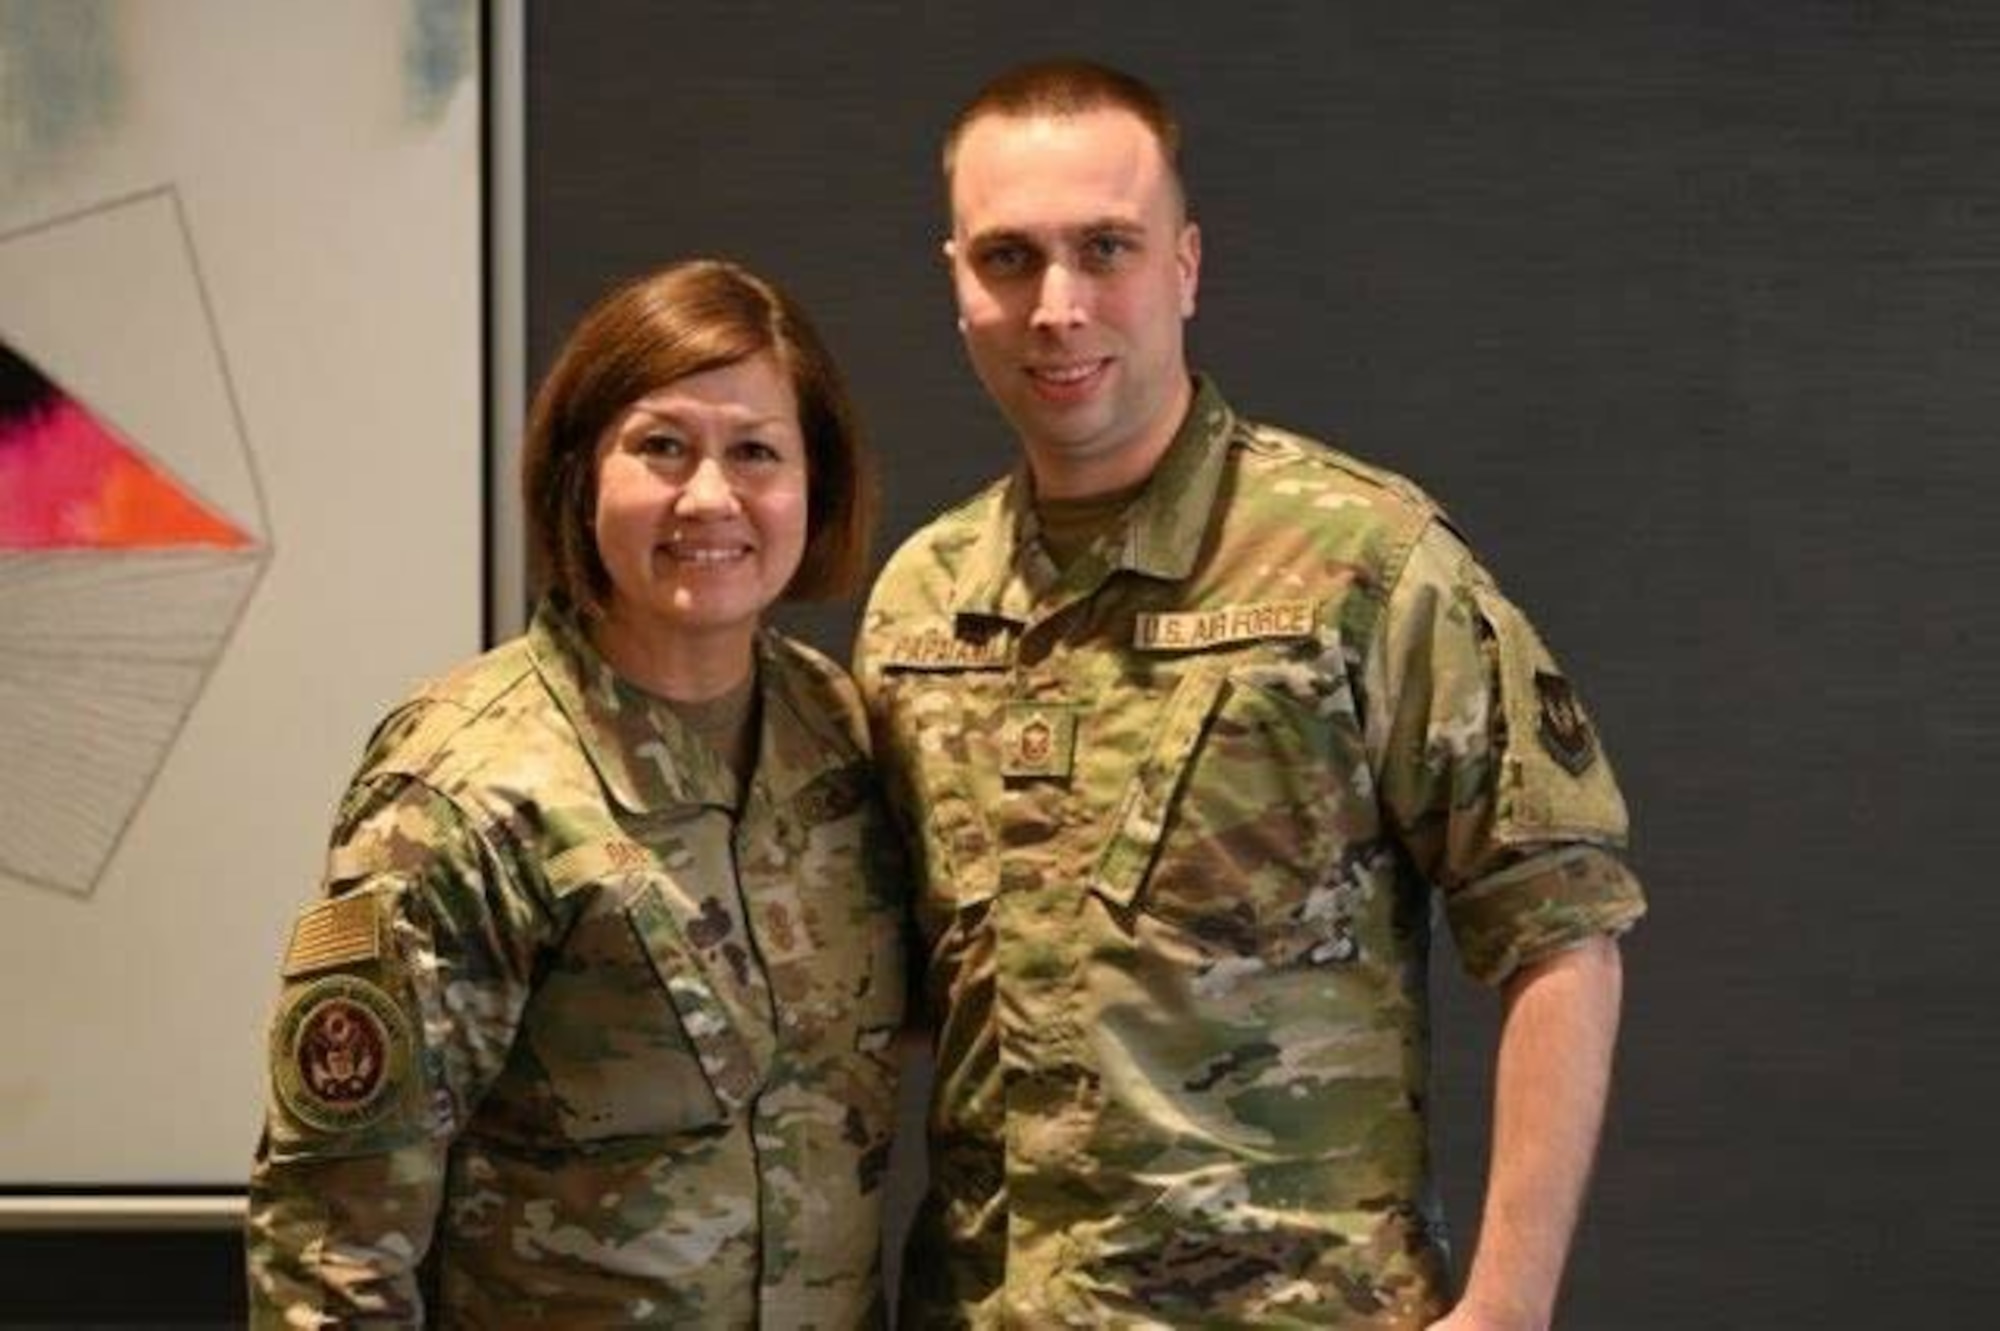 U.S. Air Force Master Sgt. Yuriy Papayanki, 97th Healthcare Operations Squadron medical administration technician, poses for a photo with JoAnne Bass, Chief Master Sgt. of the Air Force, at the Senior Enlisted Leader International Summit in Arlington, Va., Aug. 1, 2022. Papayanki directly supported various media interviews during the summit. (Courtesy photo by Master Sgt. Yuriy Papayanki)